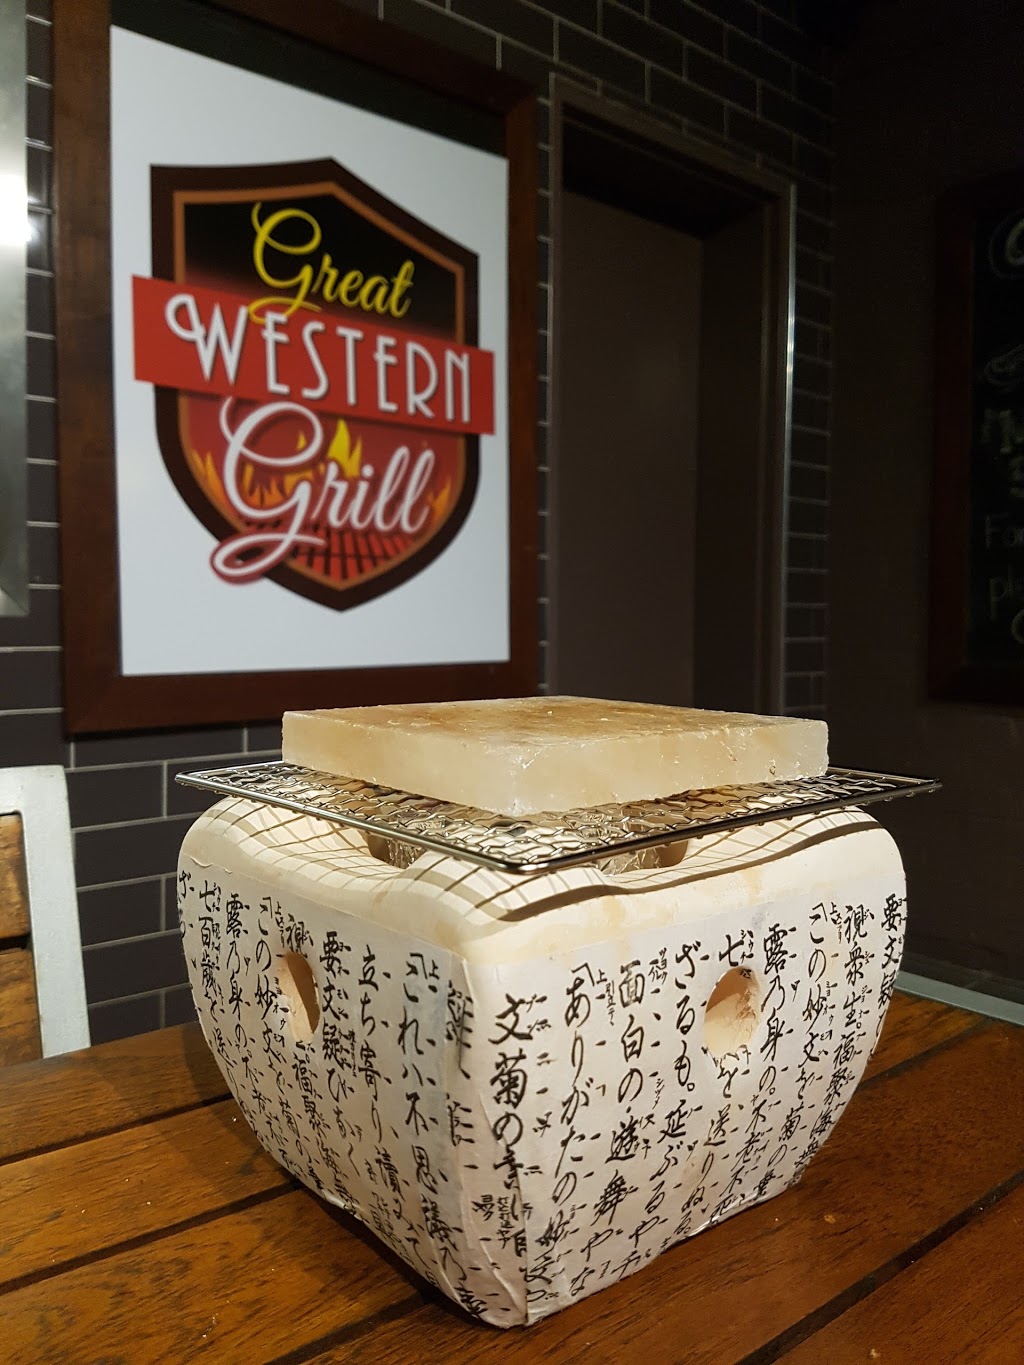 Great Western Grill | restaurant | 1 Rooty Hill Rd N, Rooty Hill NSW 2766, Australia | 0404278134 OR +61 404 278 134